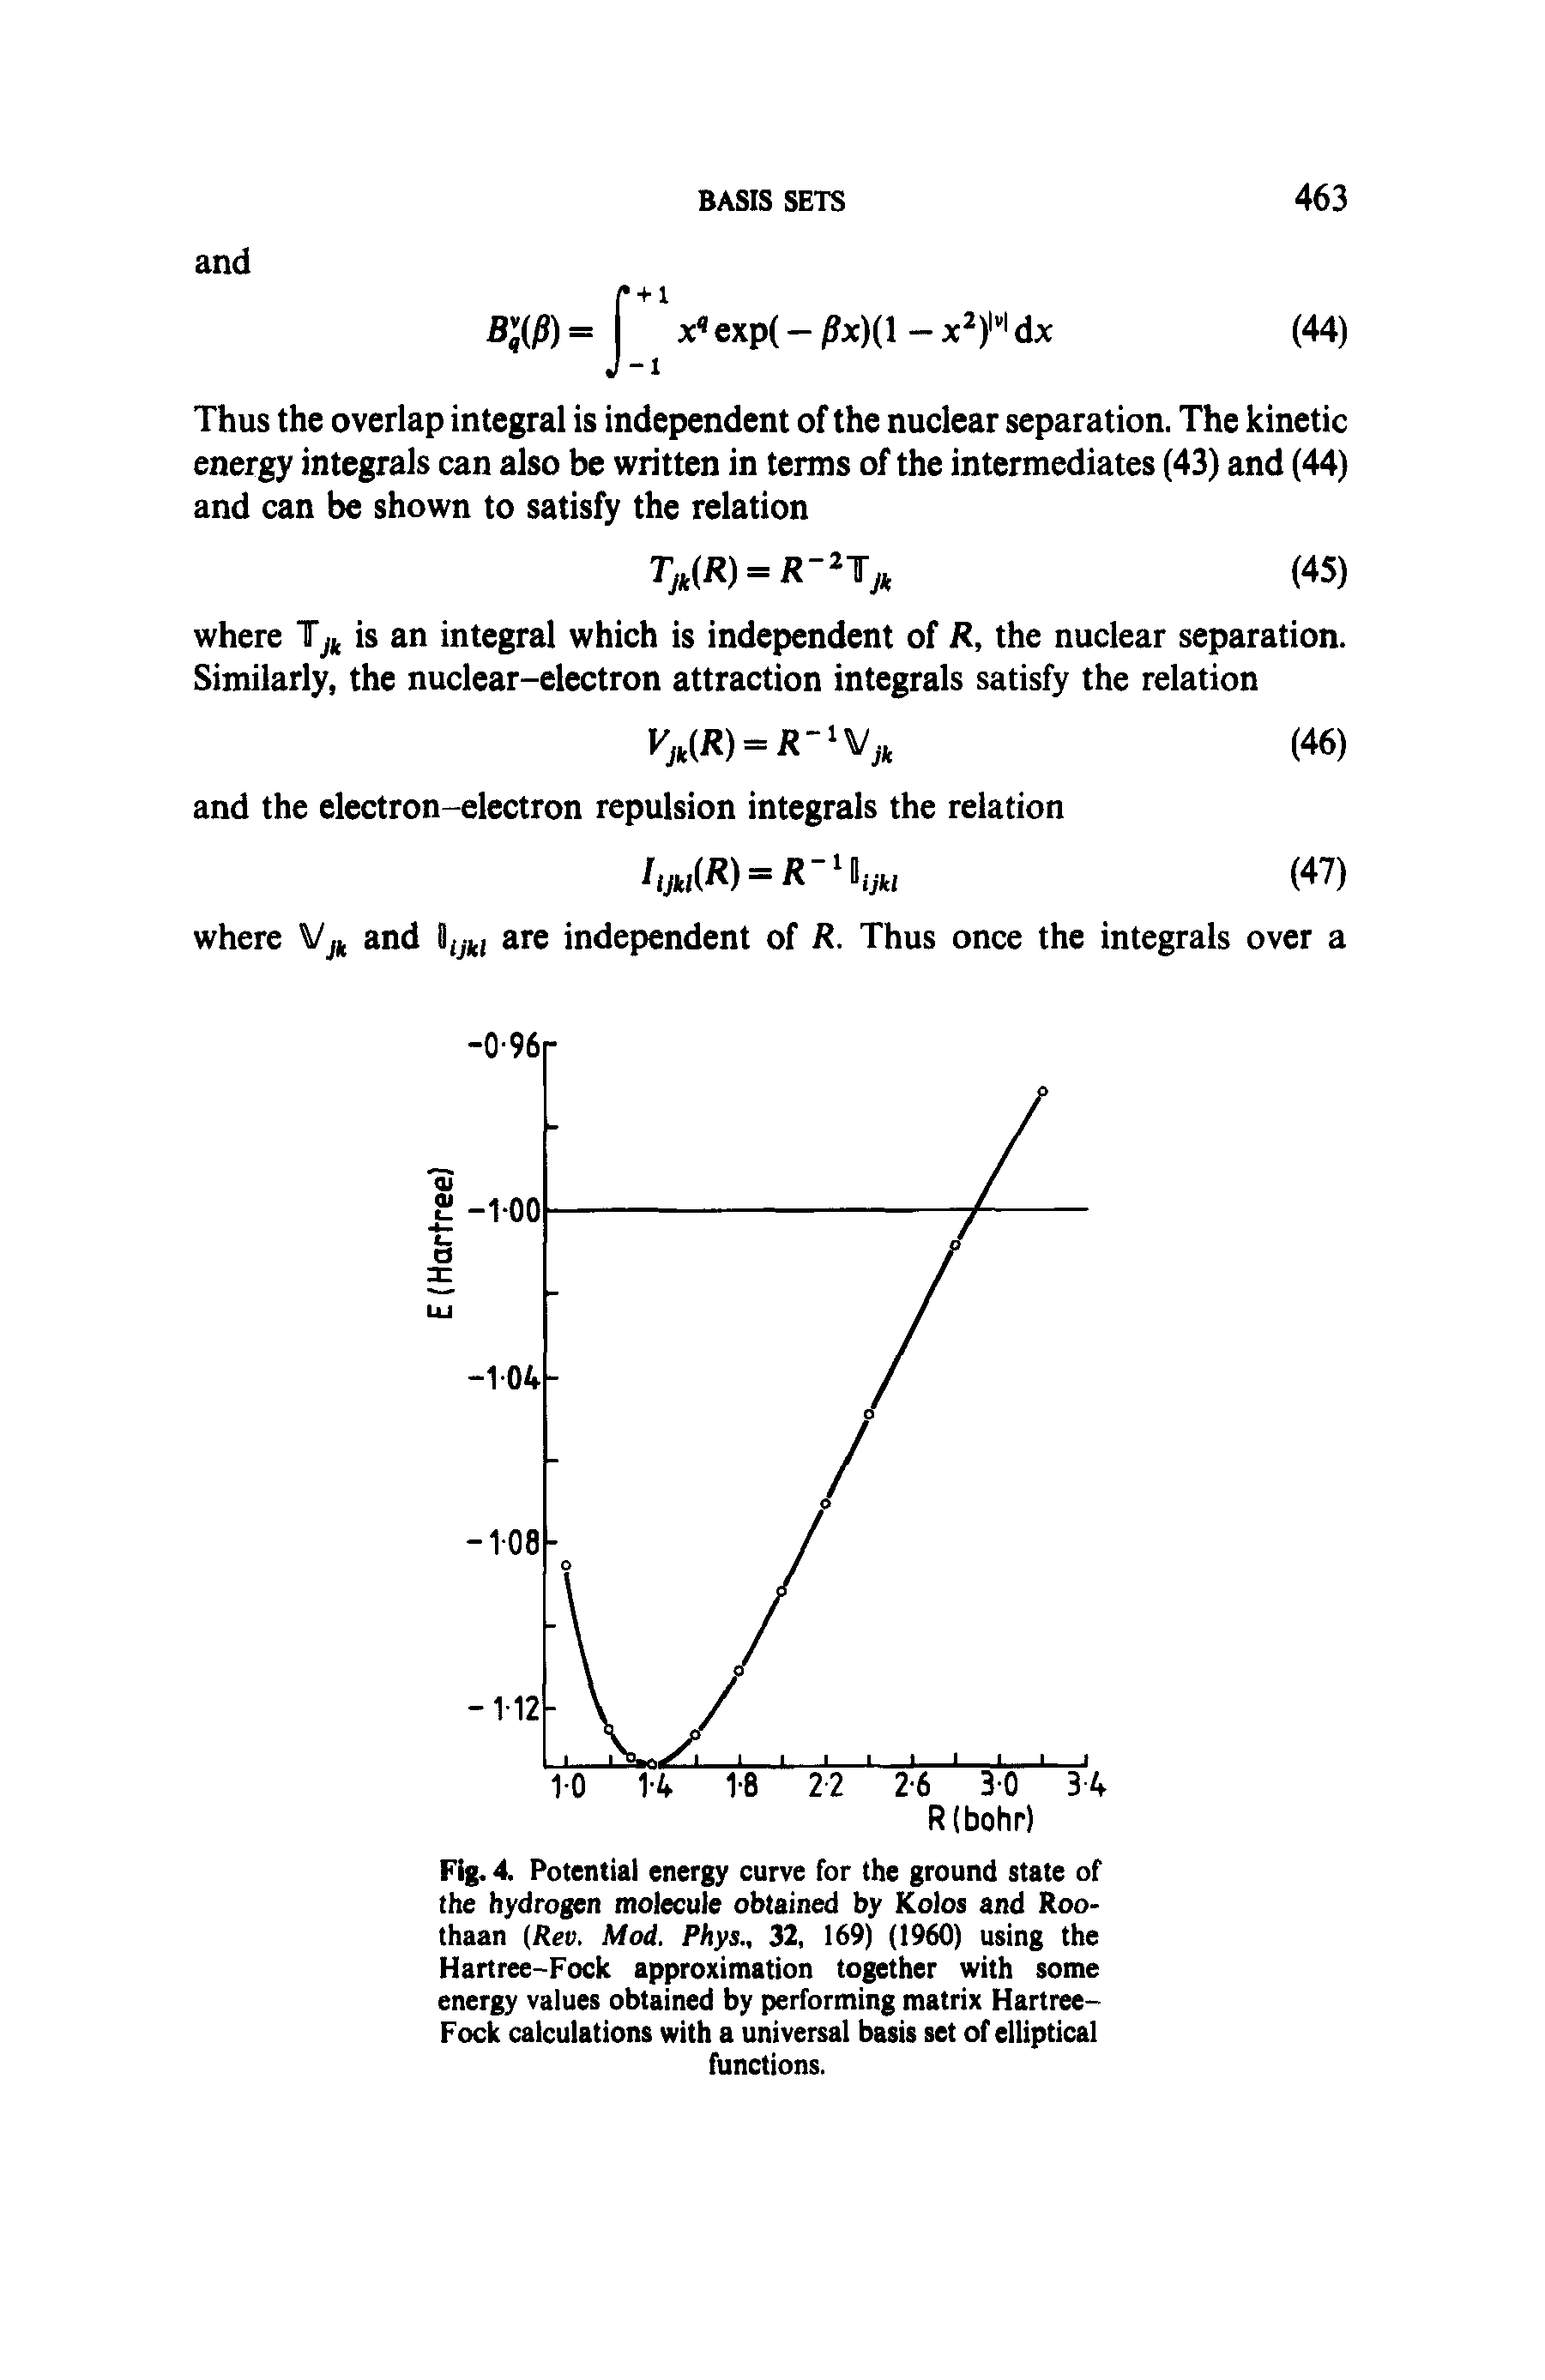 Fig. 4. Potential energy curve for the ground state of the hydrogen molecule obtained by Kolos and Roo-thaan (Rev. Mod. Phys., 32, 169) (1960) using the Hartree-Fock approximation together with some energy values obtained by performing matrix Hartree-Fock calculations with a universal b set of elliptical functions.